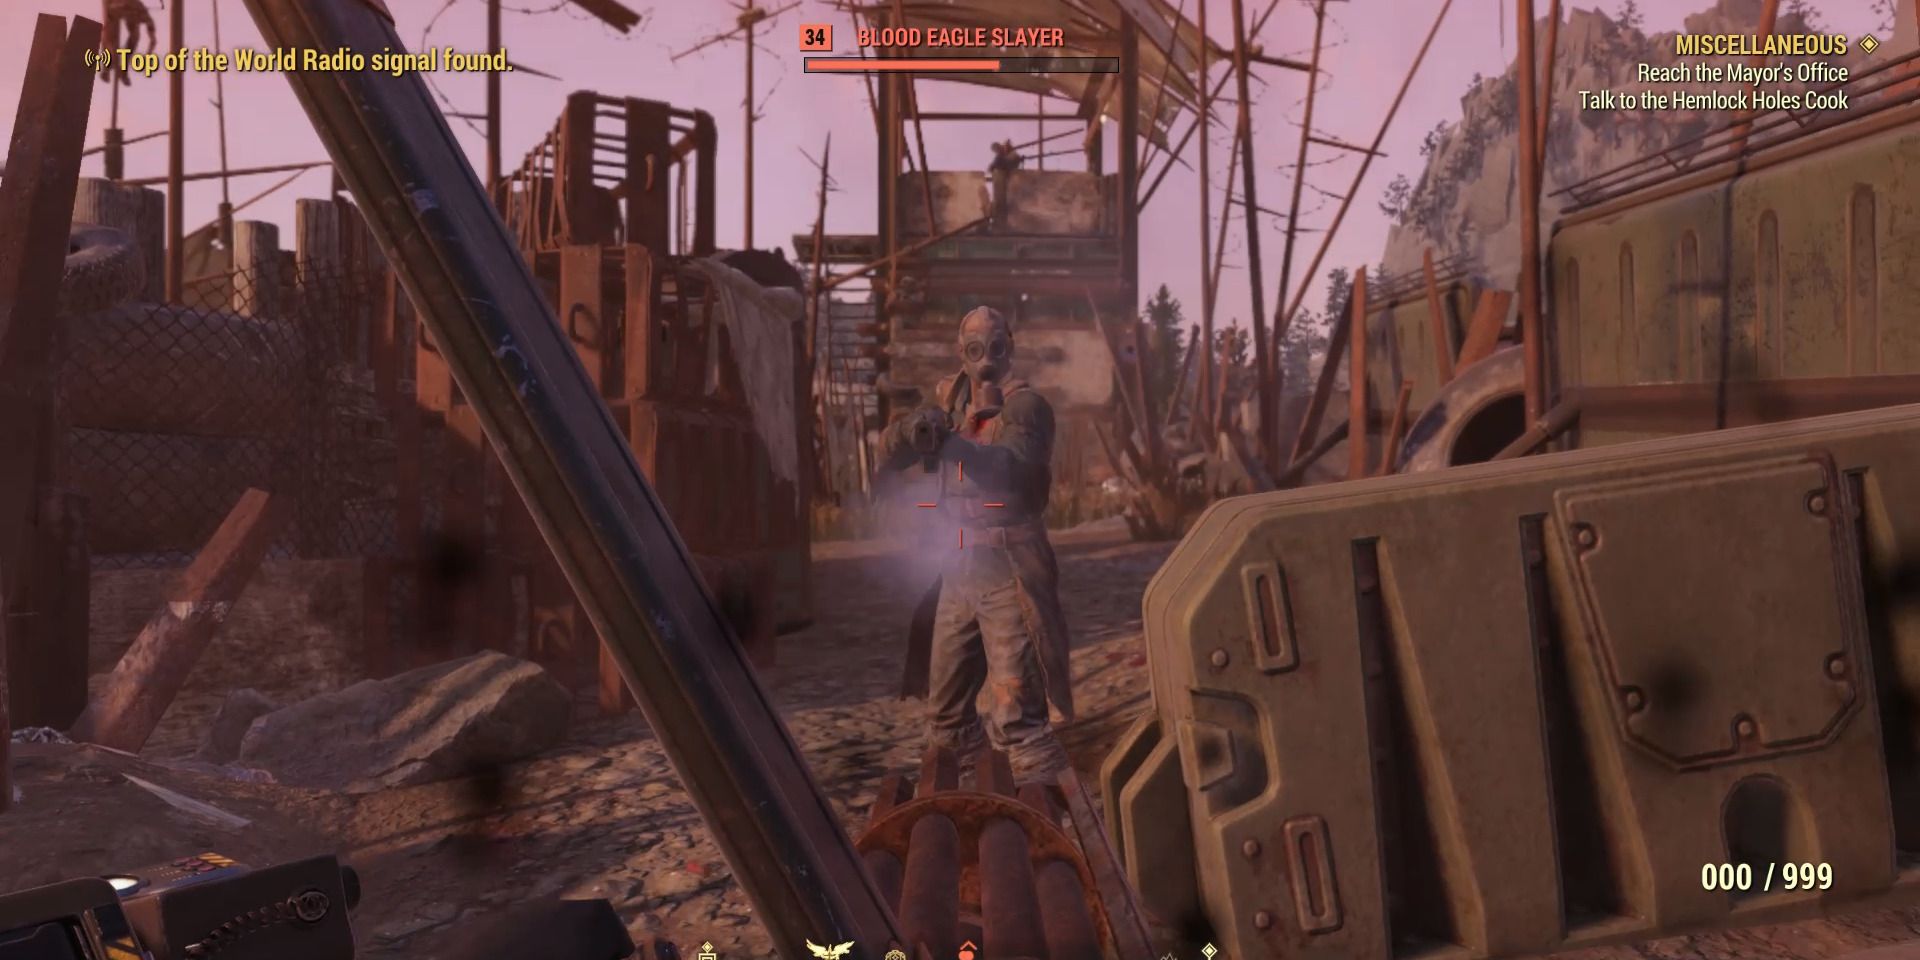 Image of a blood eagle slayer in Fallout 76